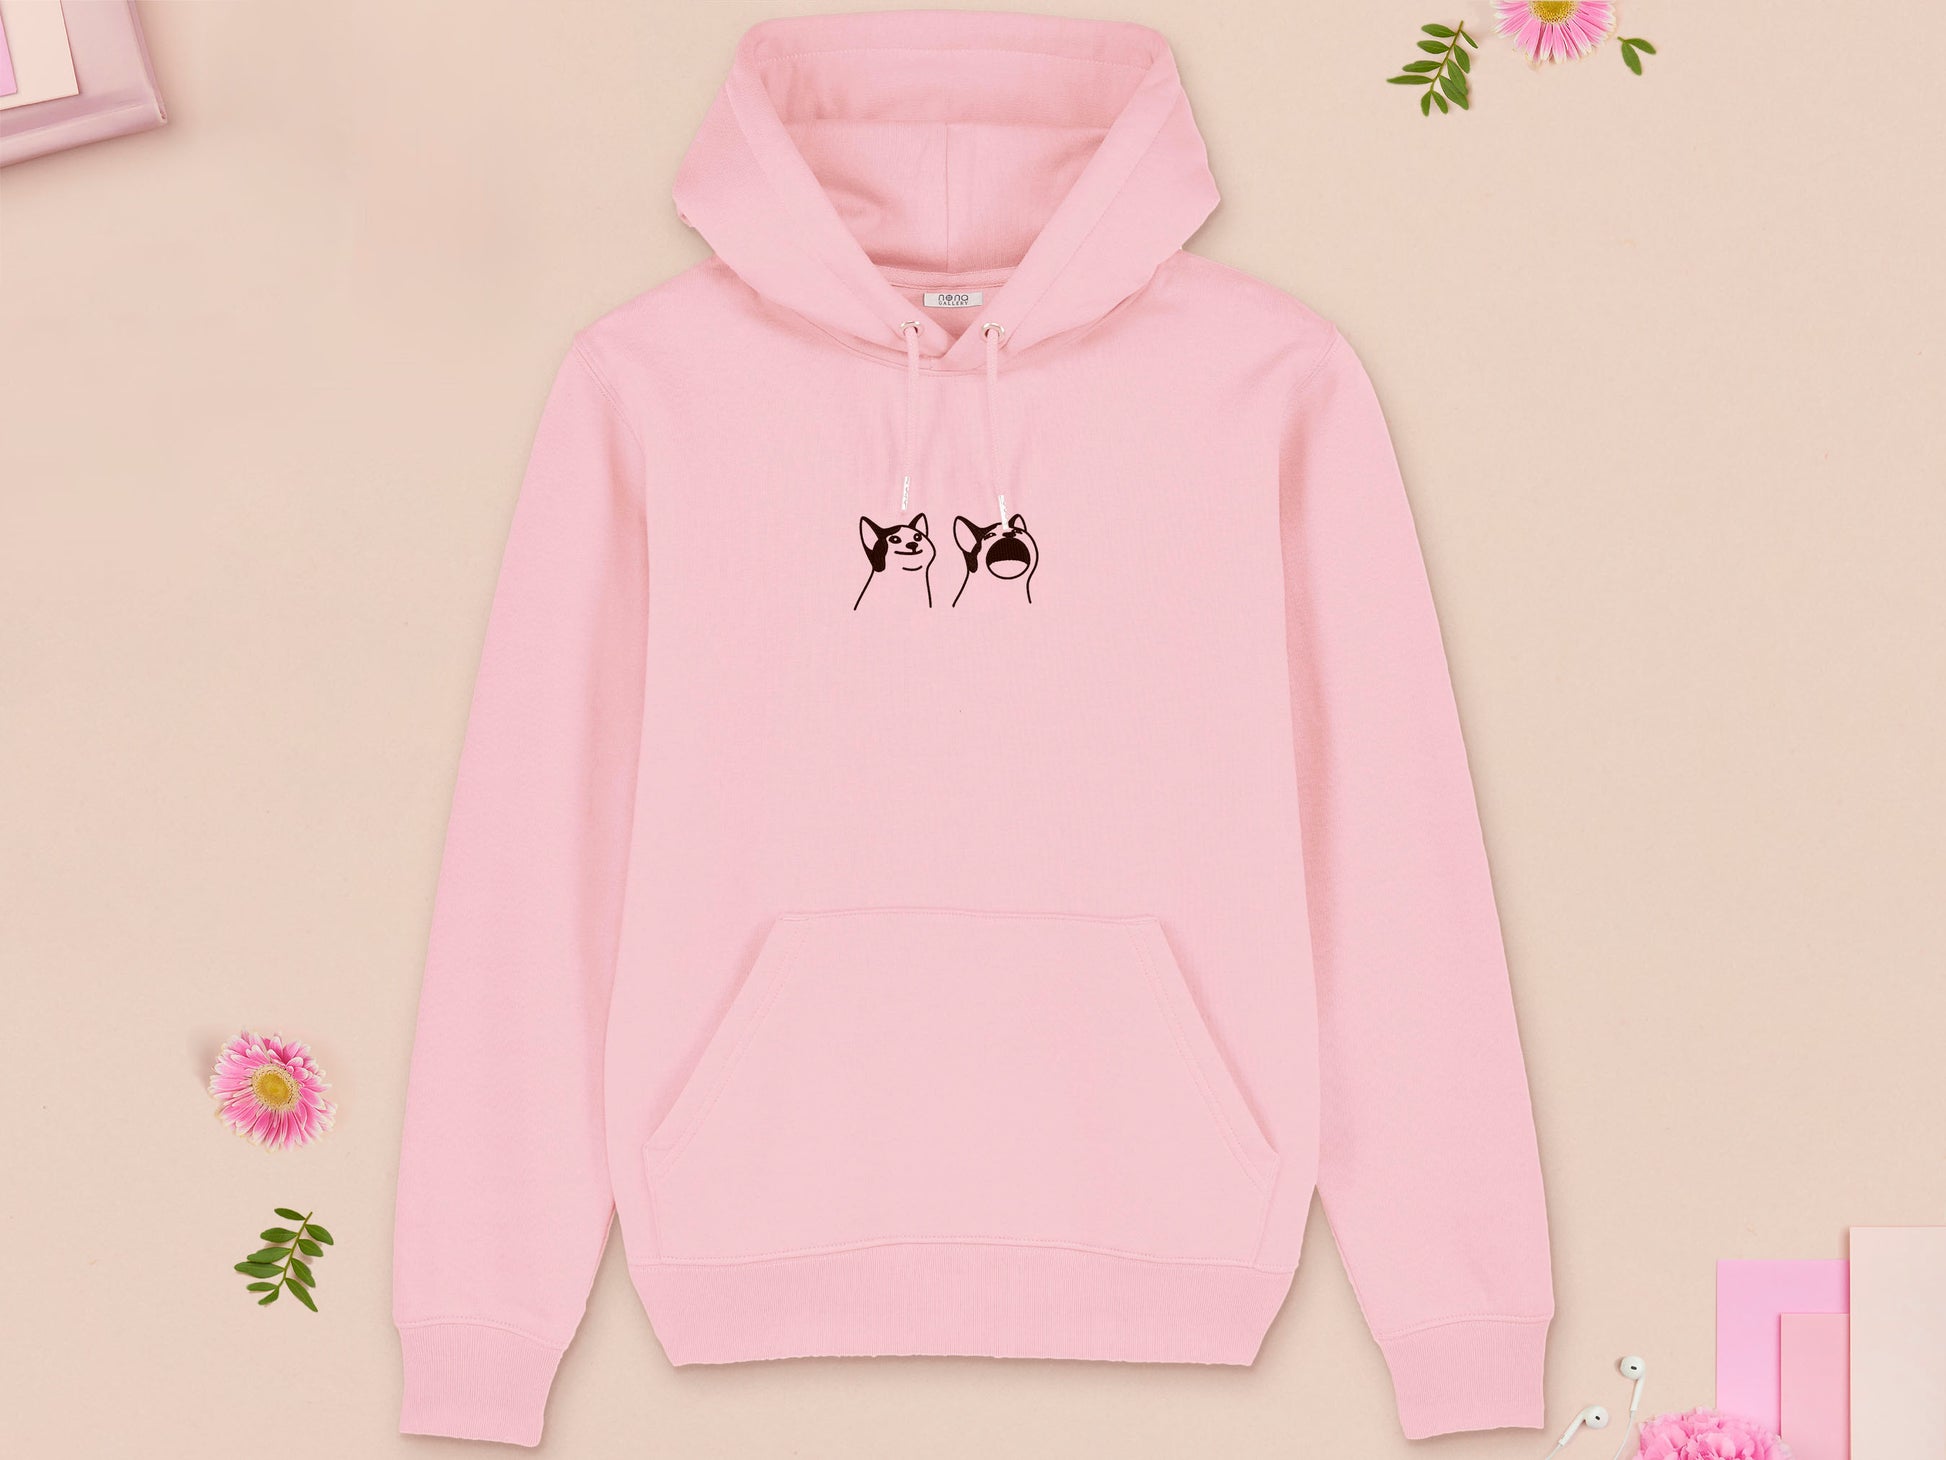 A pink long sleeved fleece hoodie, with an embroidered brown thread design of a cute popcat the cat meme reaction twitch emote